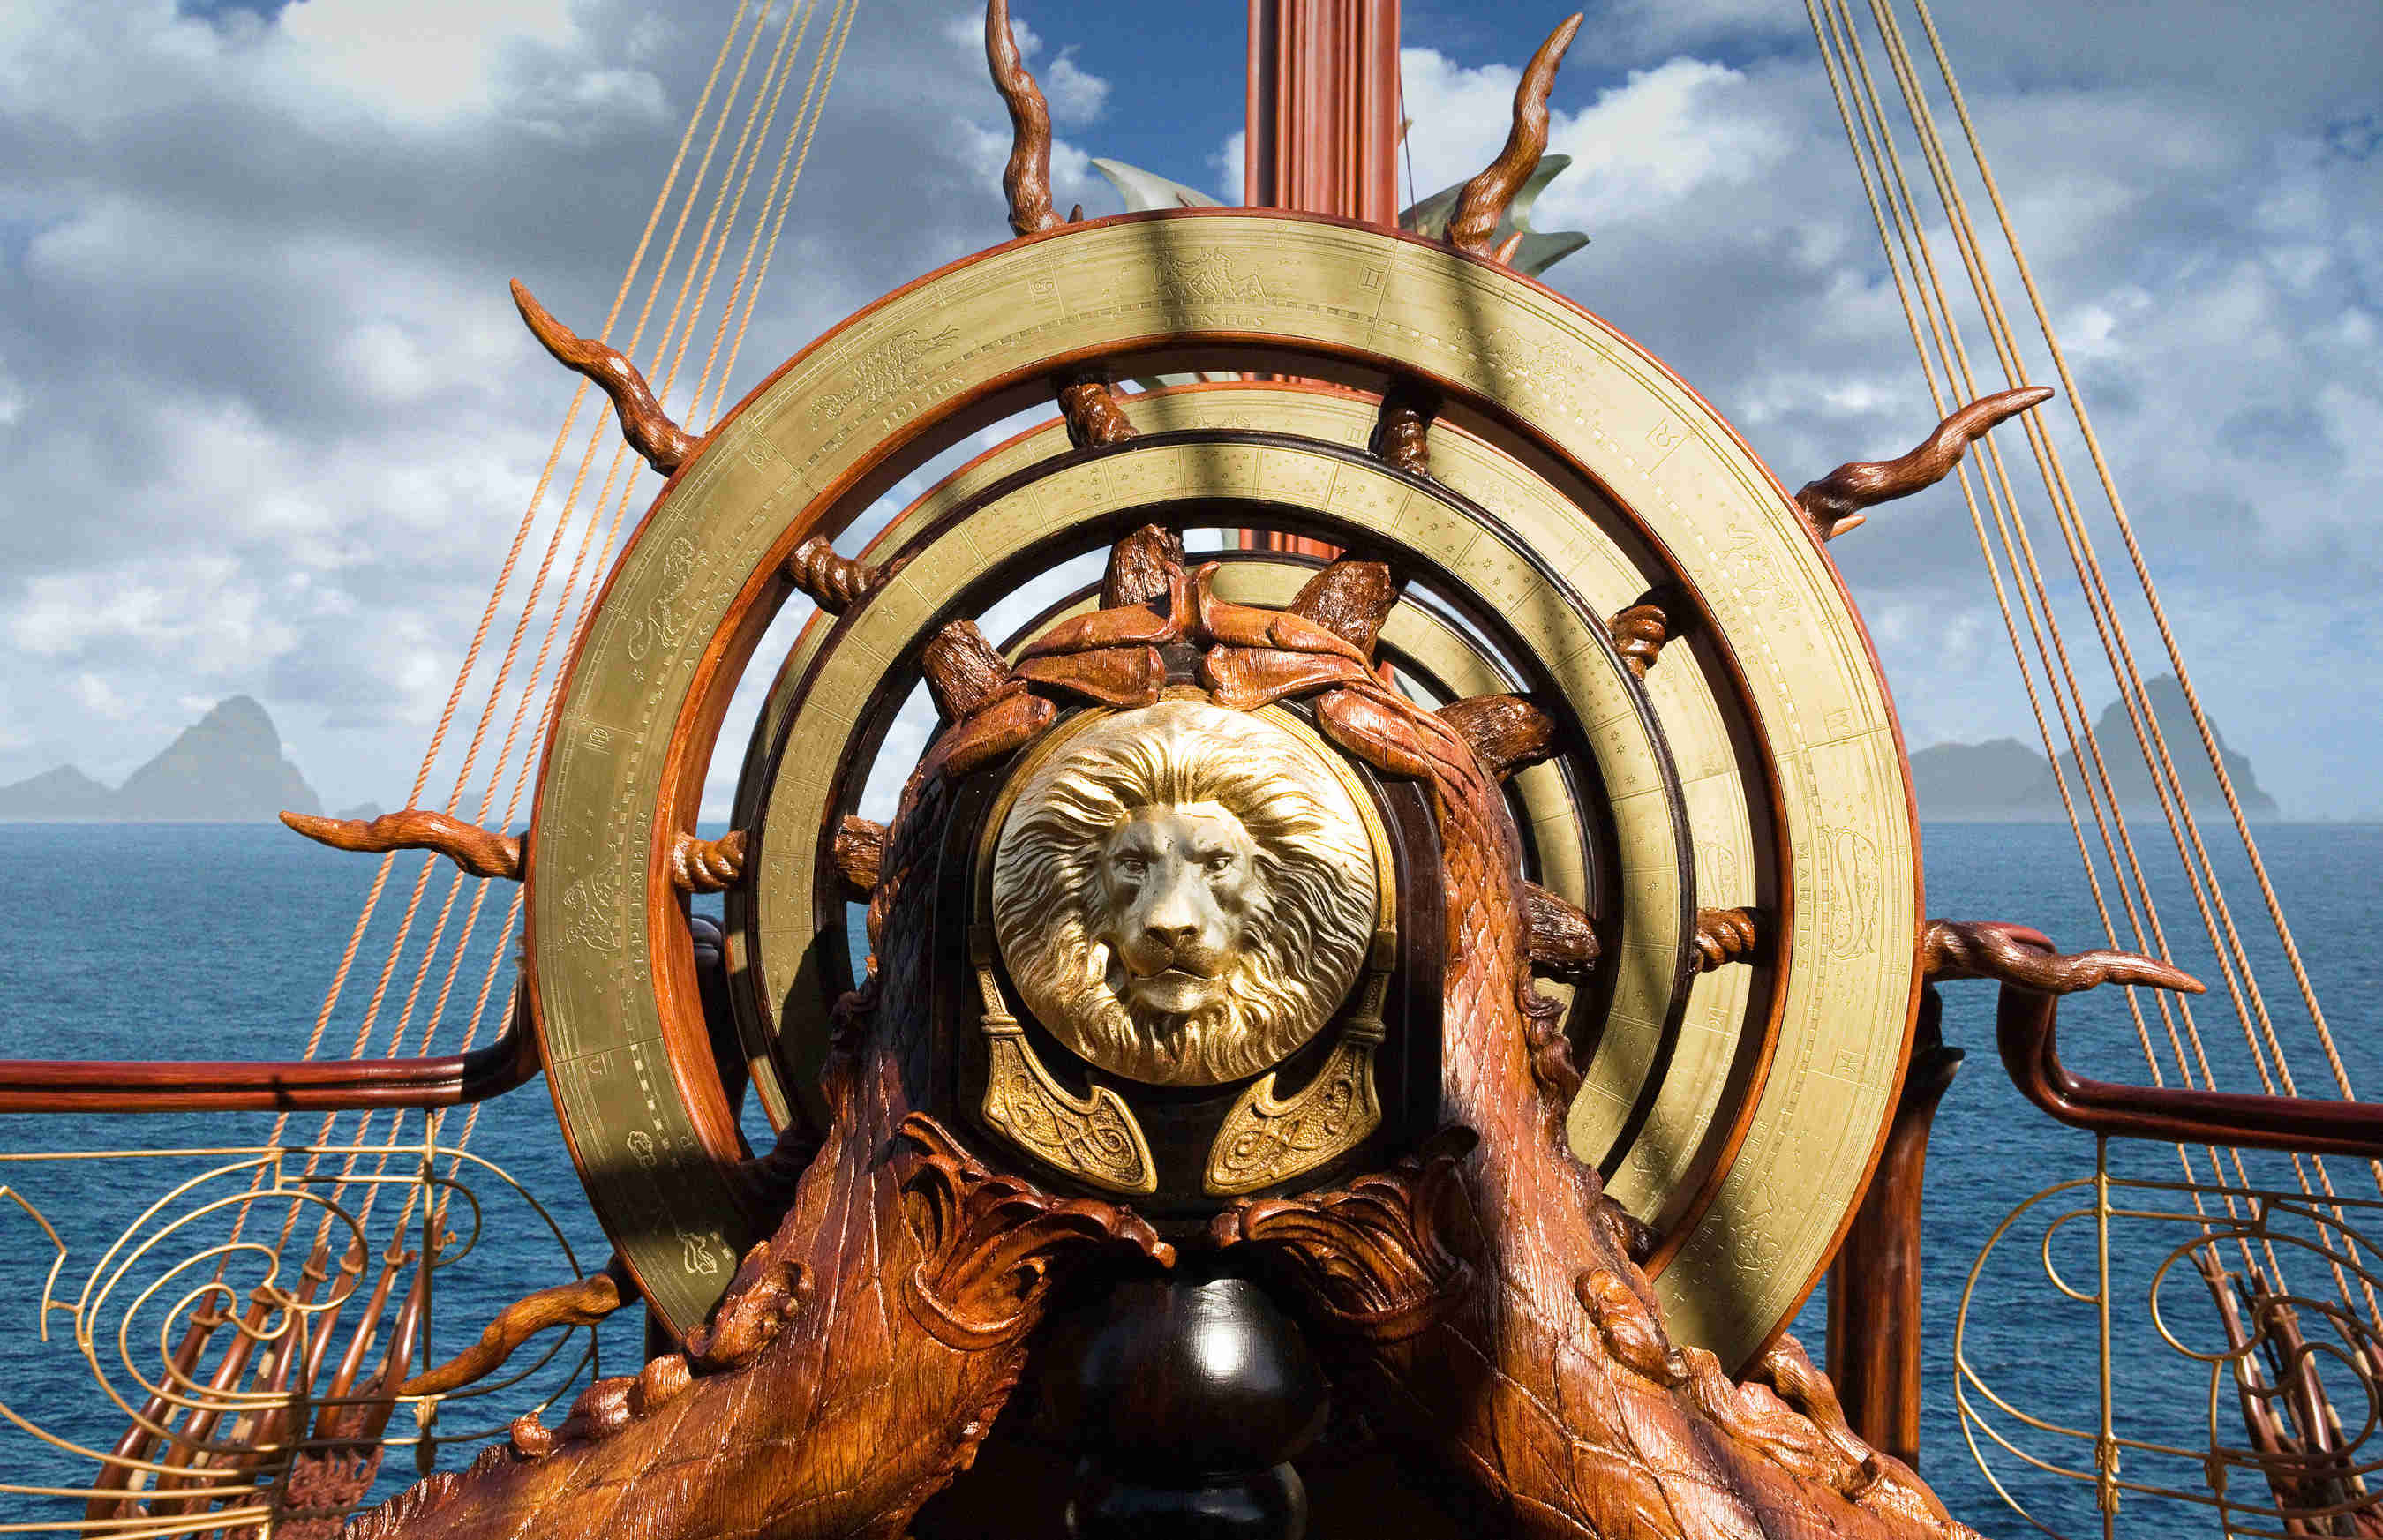 The Chronicles of Narnia: The Voyage of the Dawn Treader Picture 2.